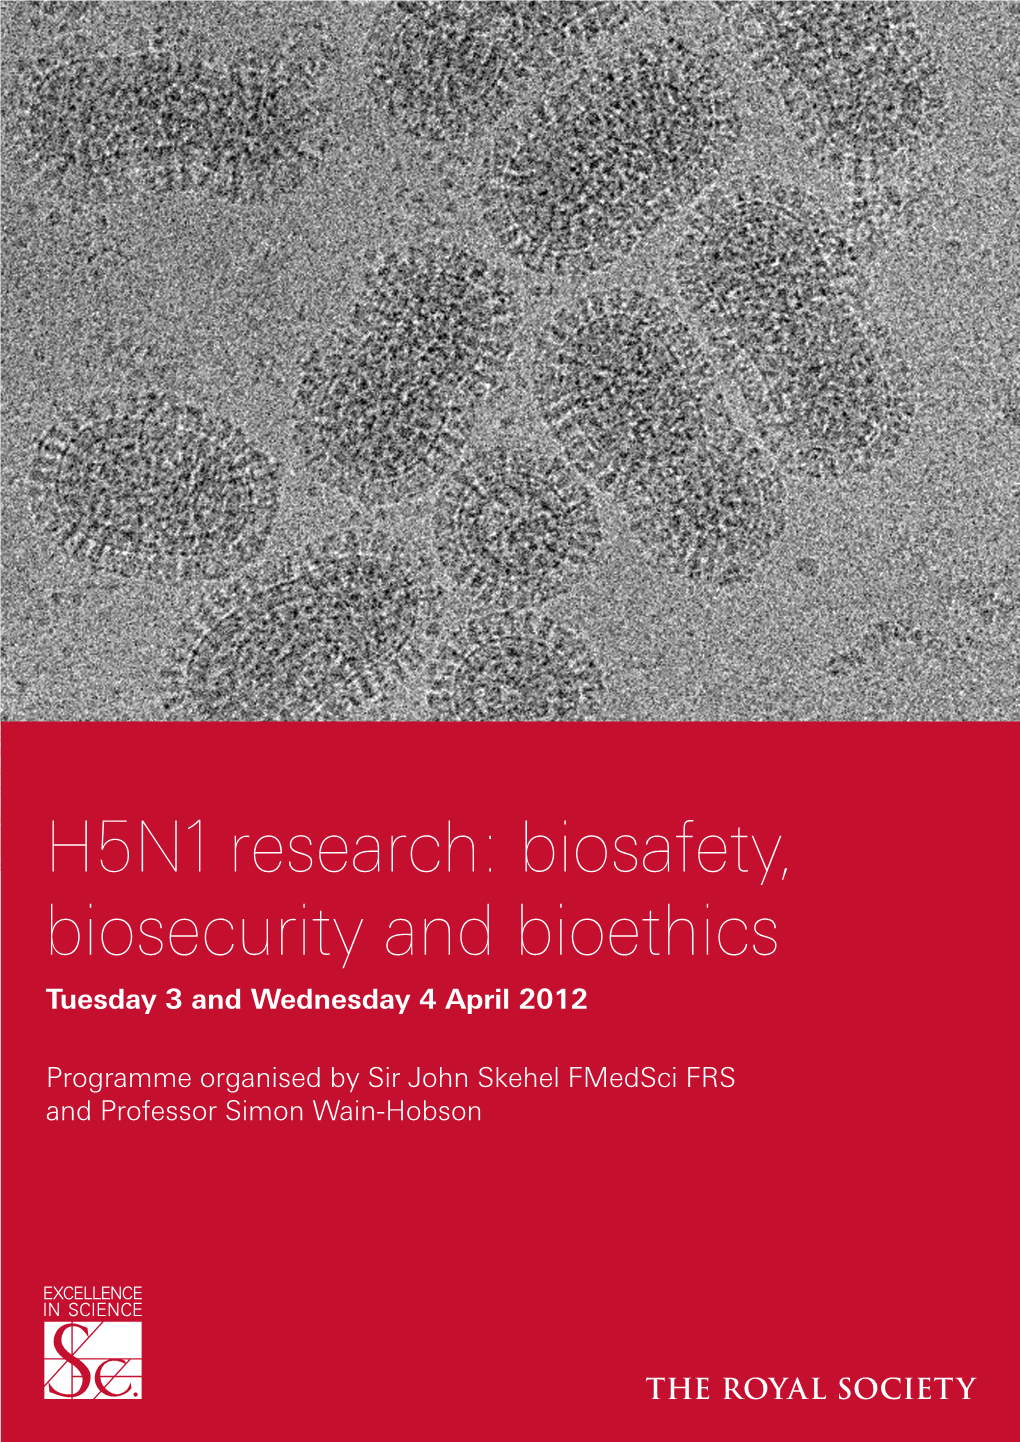 H5N1 Research: Biosafety, Biosecurity and Bioethics Tuesday 3 and Wednesday 4 April 2012